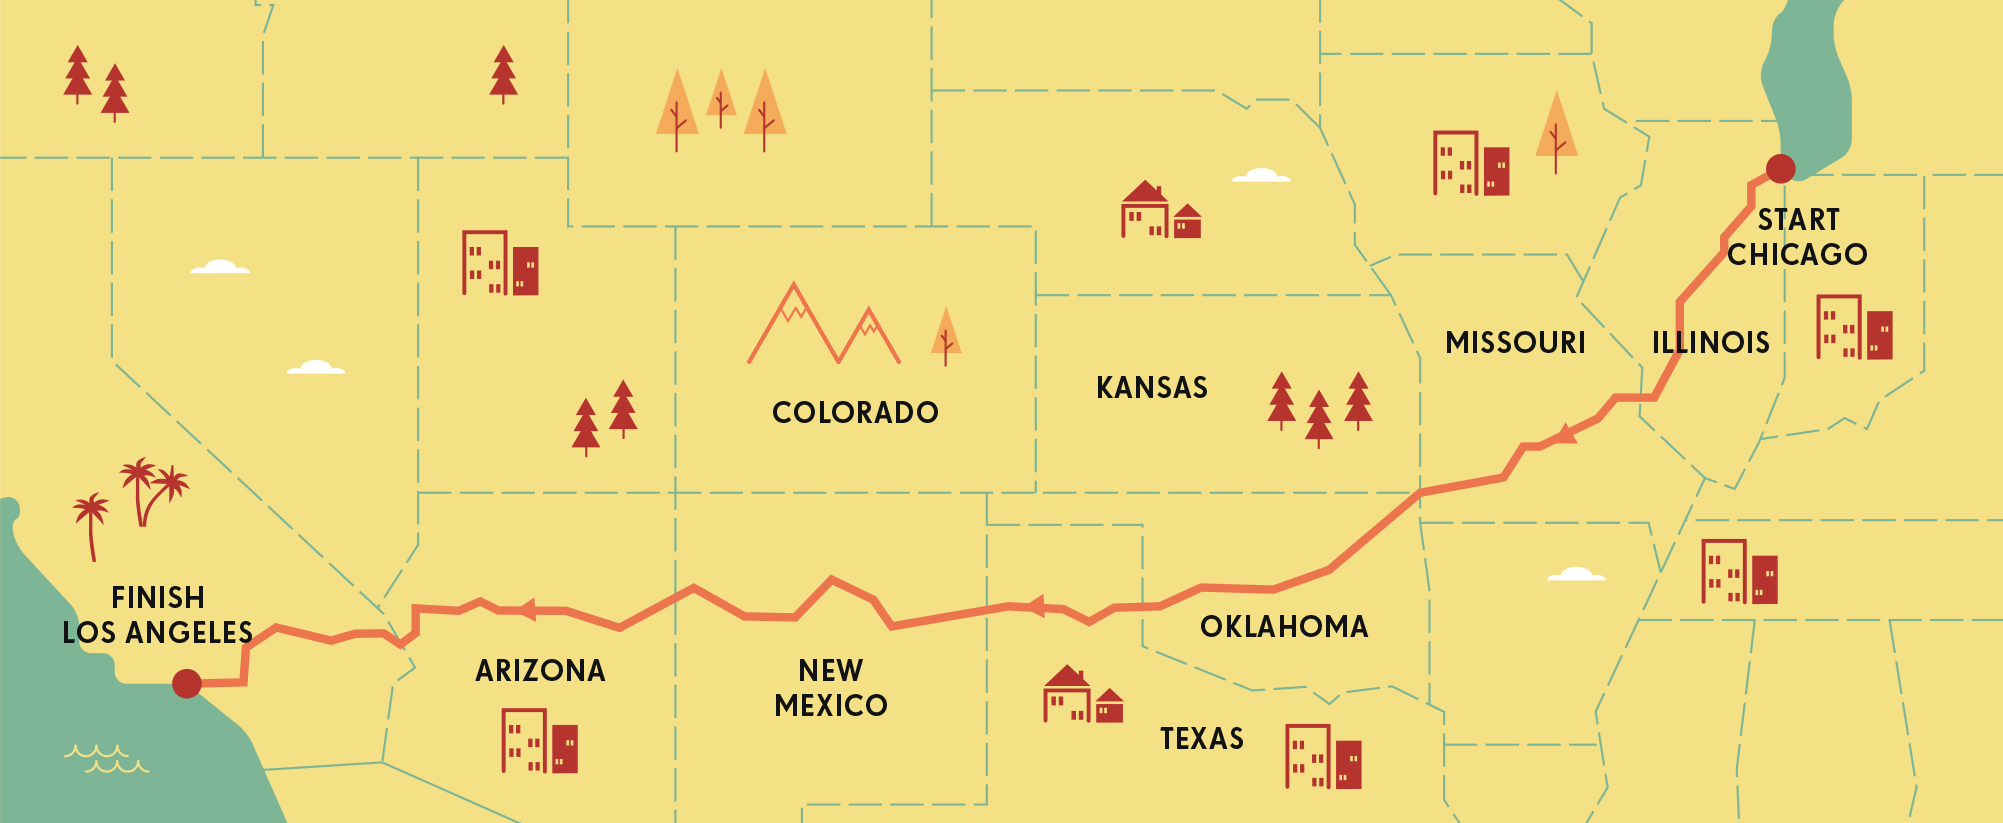 Forholdsvis Korridor teater Route 66: How Much it Costs To Take The 2,400 Road Trip | Money